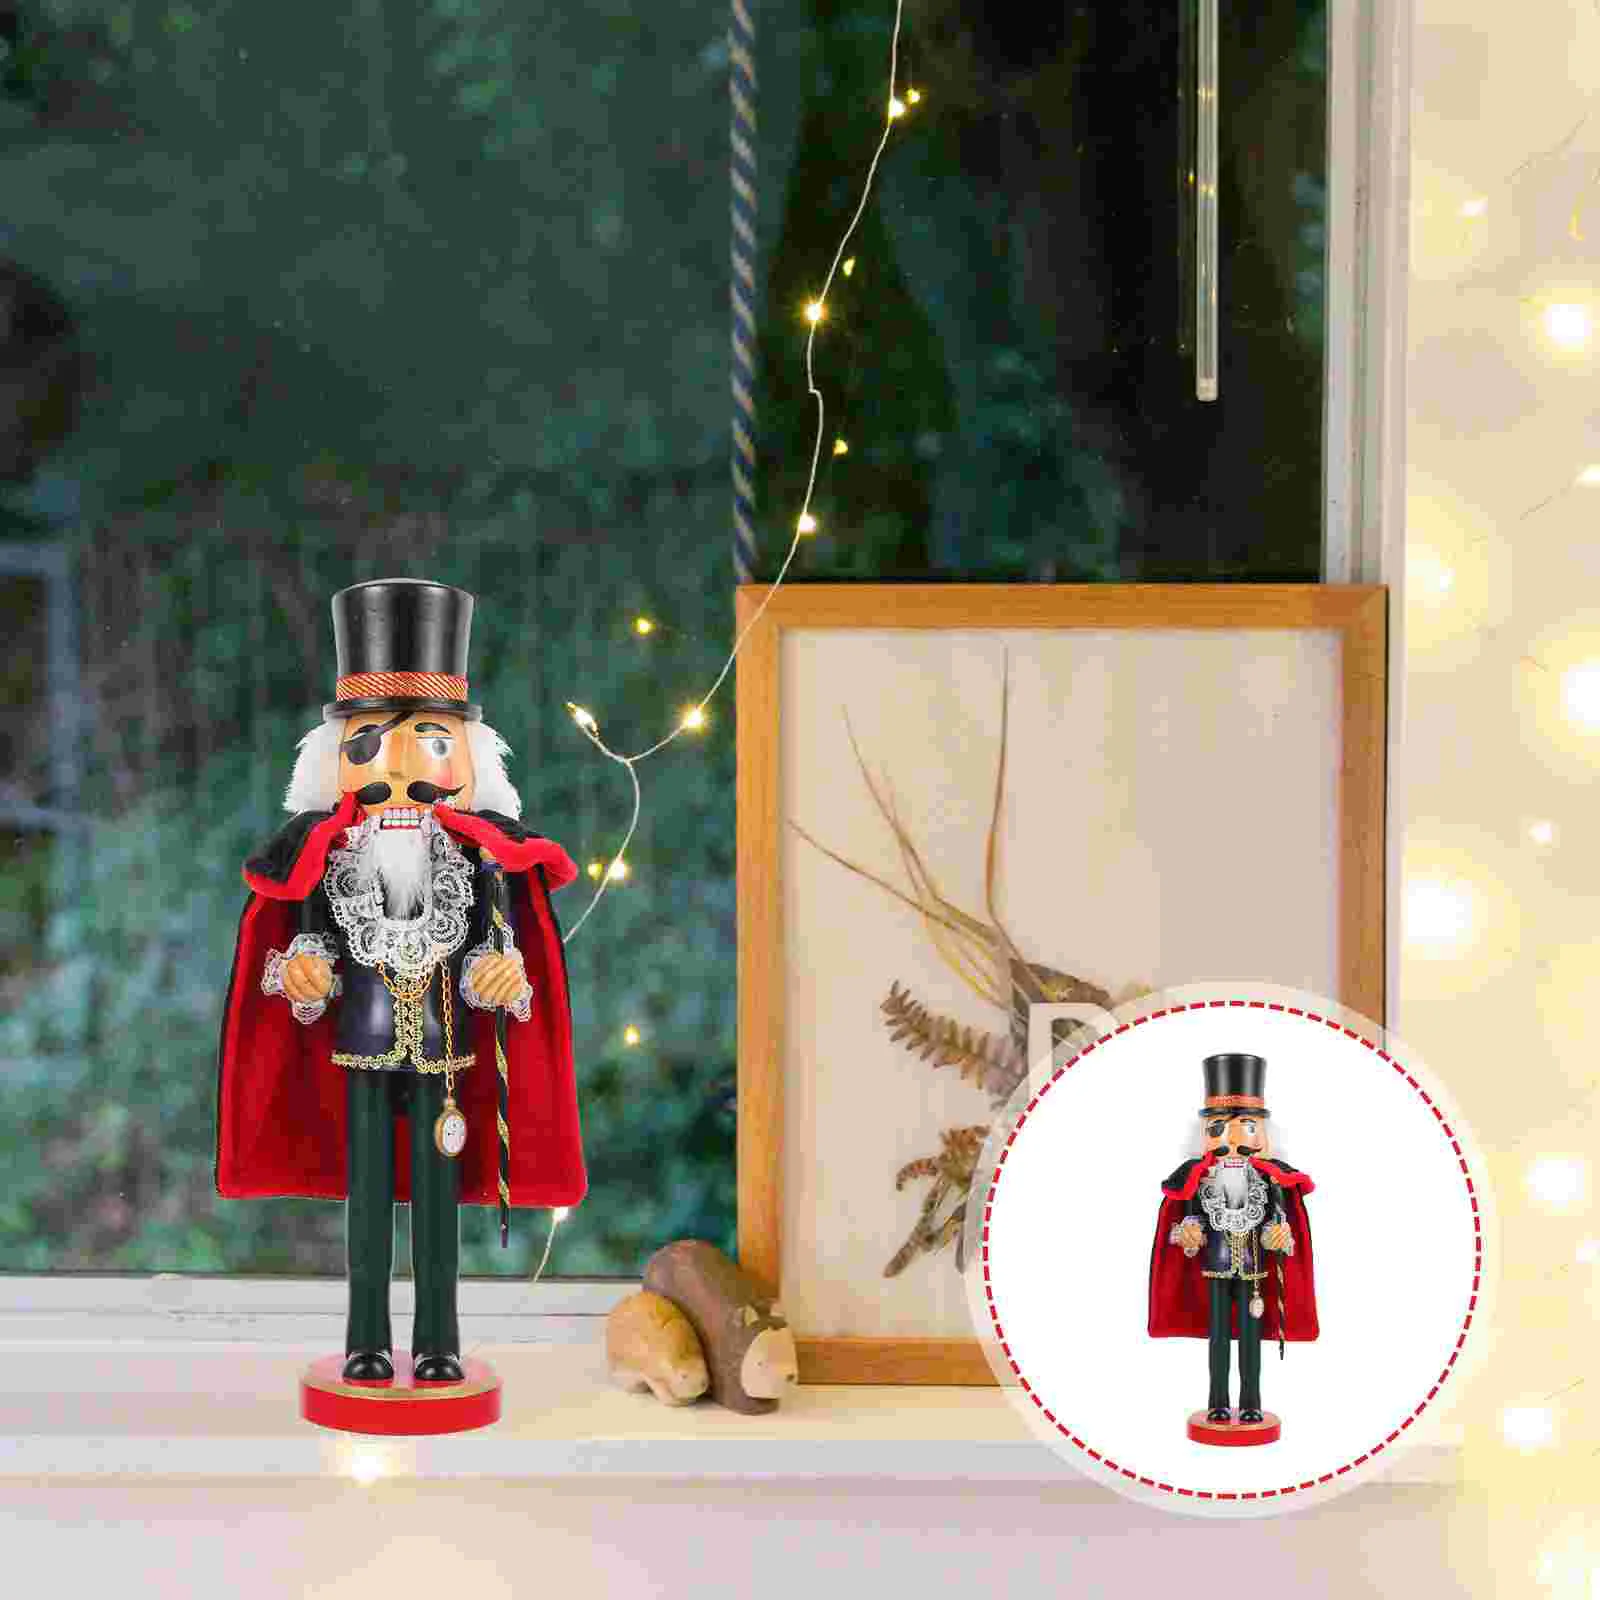 

Outdoor Toys Kids Pirate Nutcracker Decor Festival Traditional Ornaments Baby Small Wood Nutcrackers Work Christmas